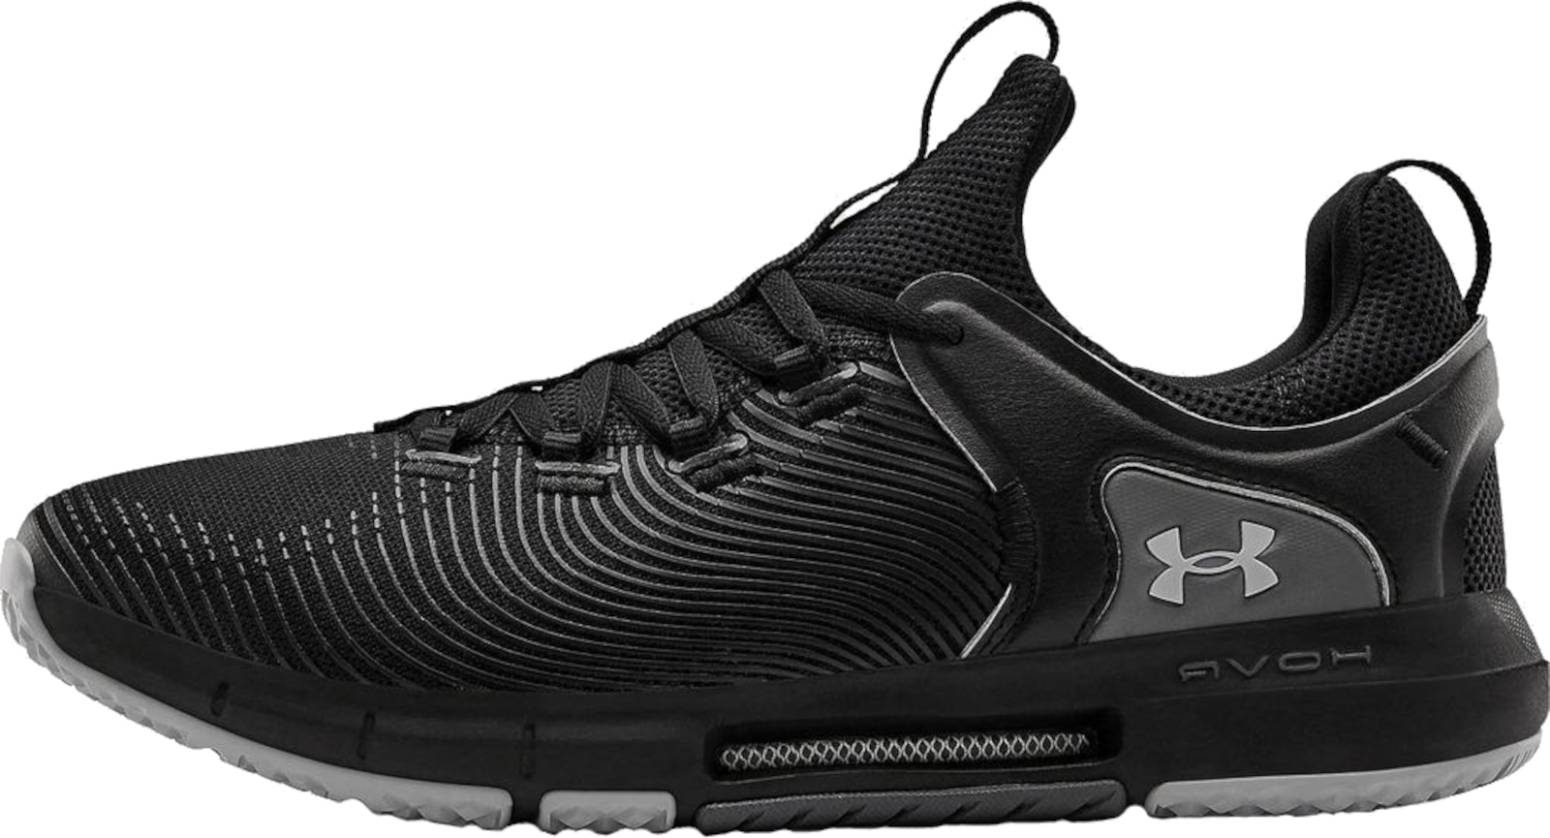 Under Armour HOVR Rise 2 Review 2022, Facts, Deals | RunRepeat